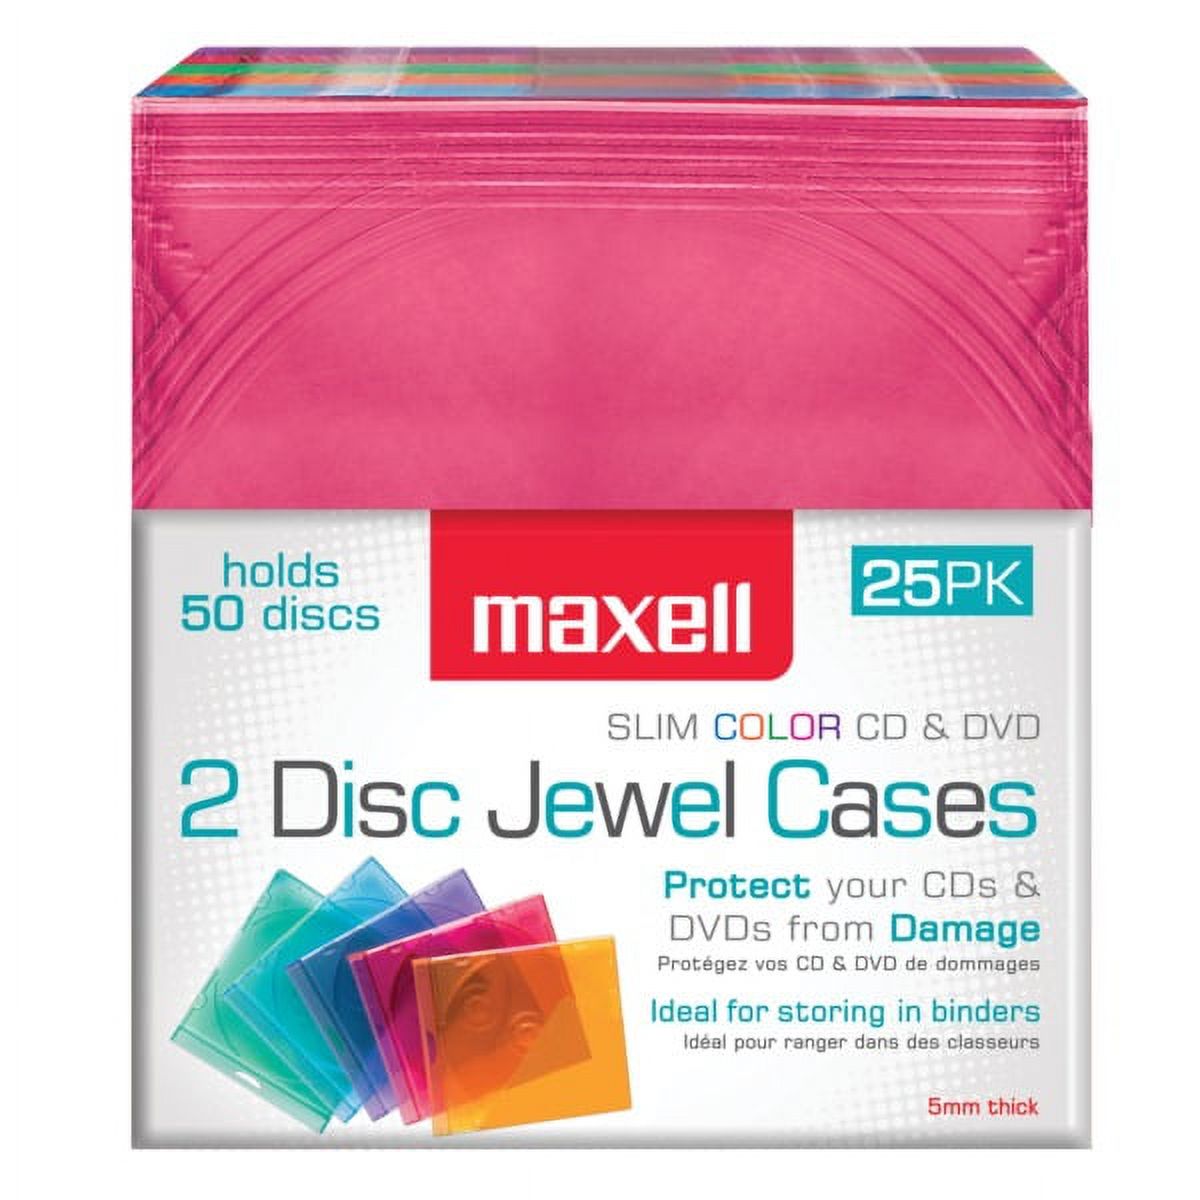 Maxell® Dual-disc Jewel Cases, 25 Pack - image 1 of 4